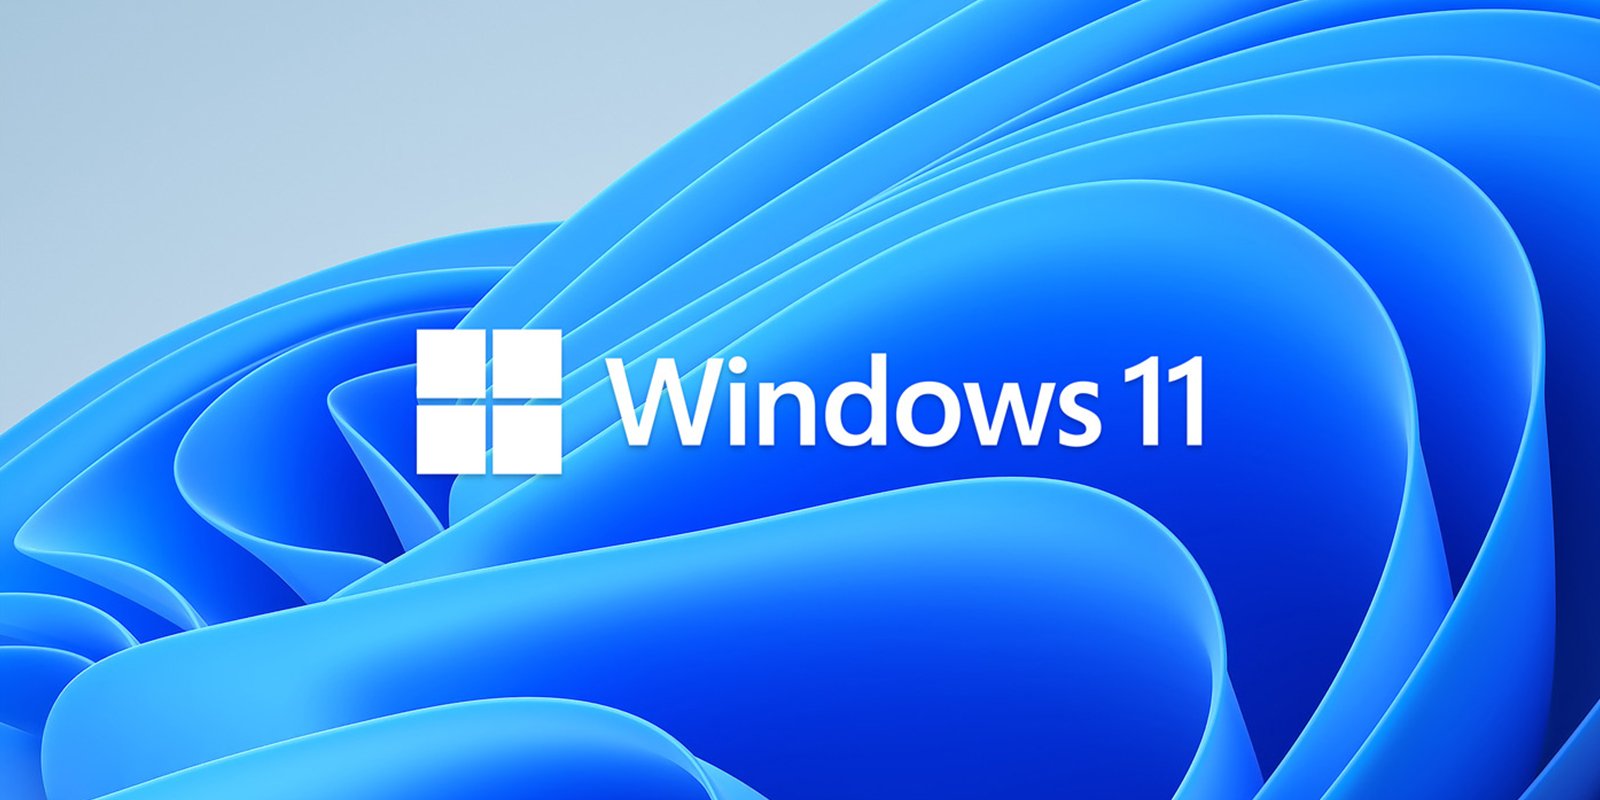 Windows 11 Officially Launches Today, Available To Download